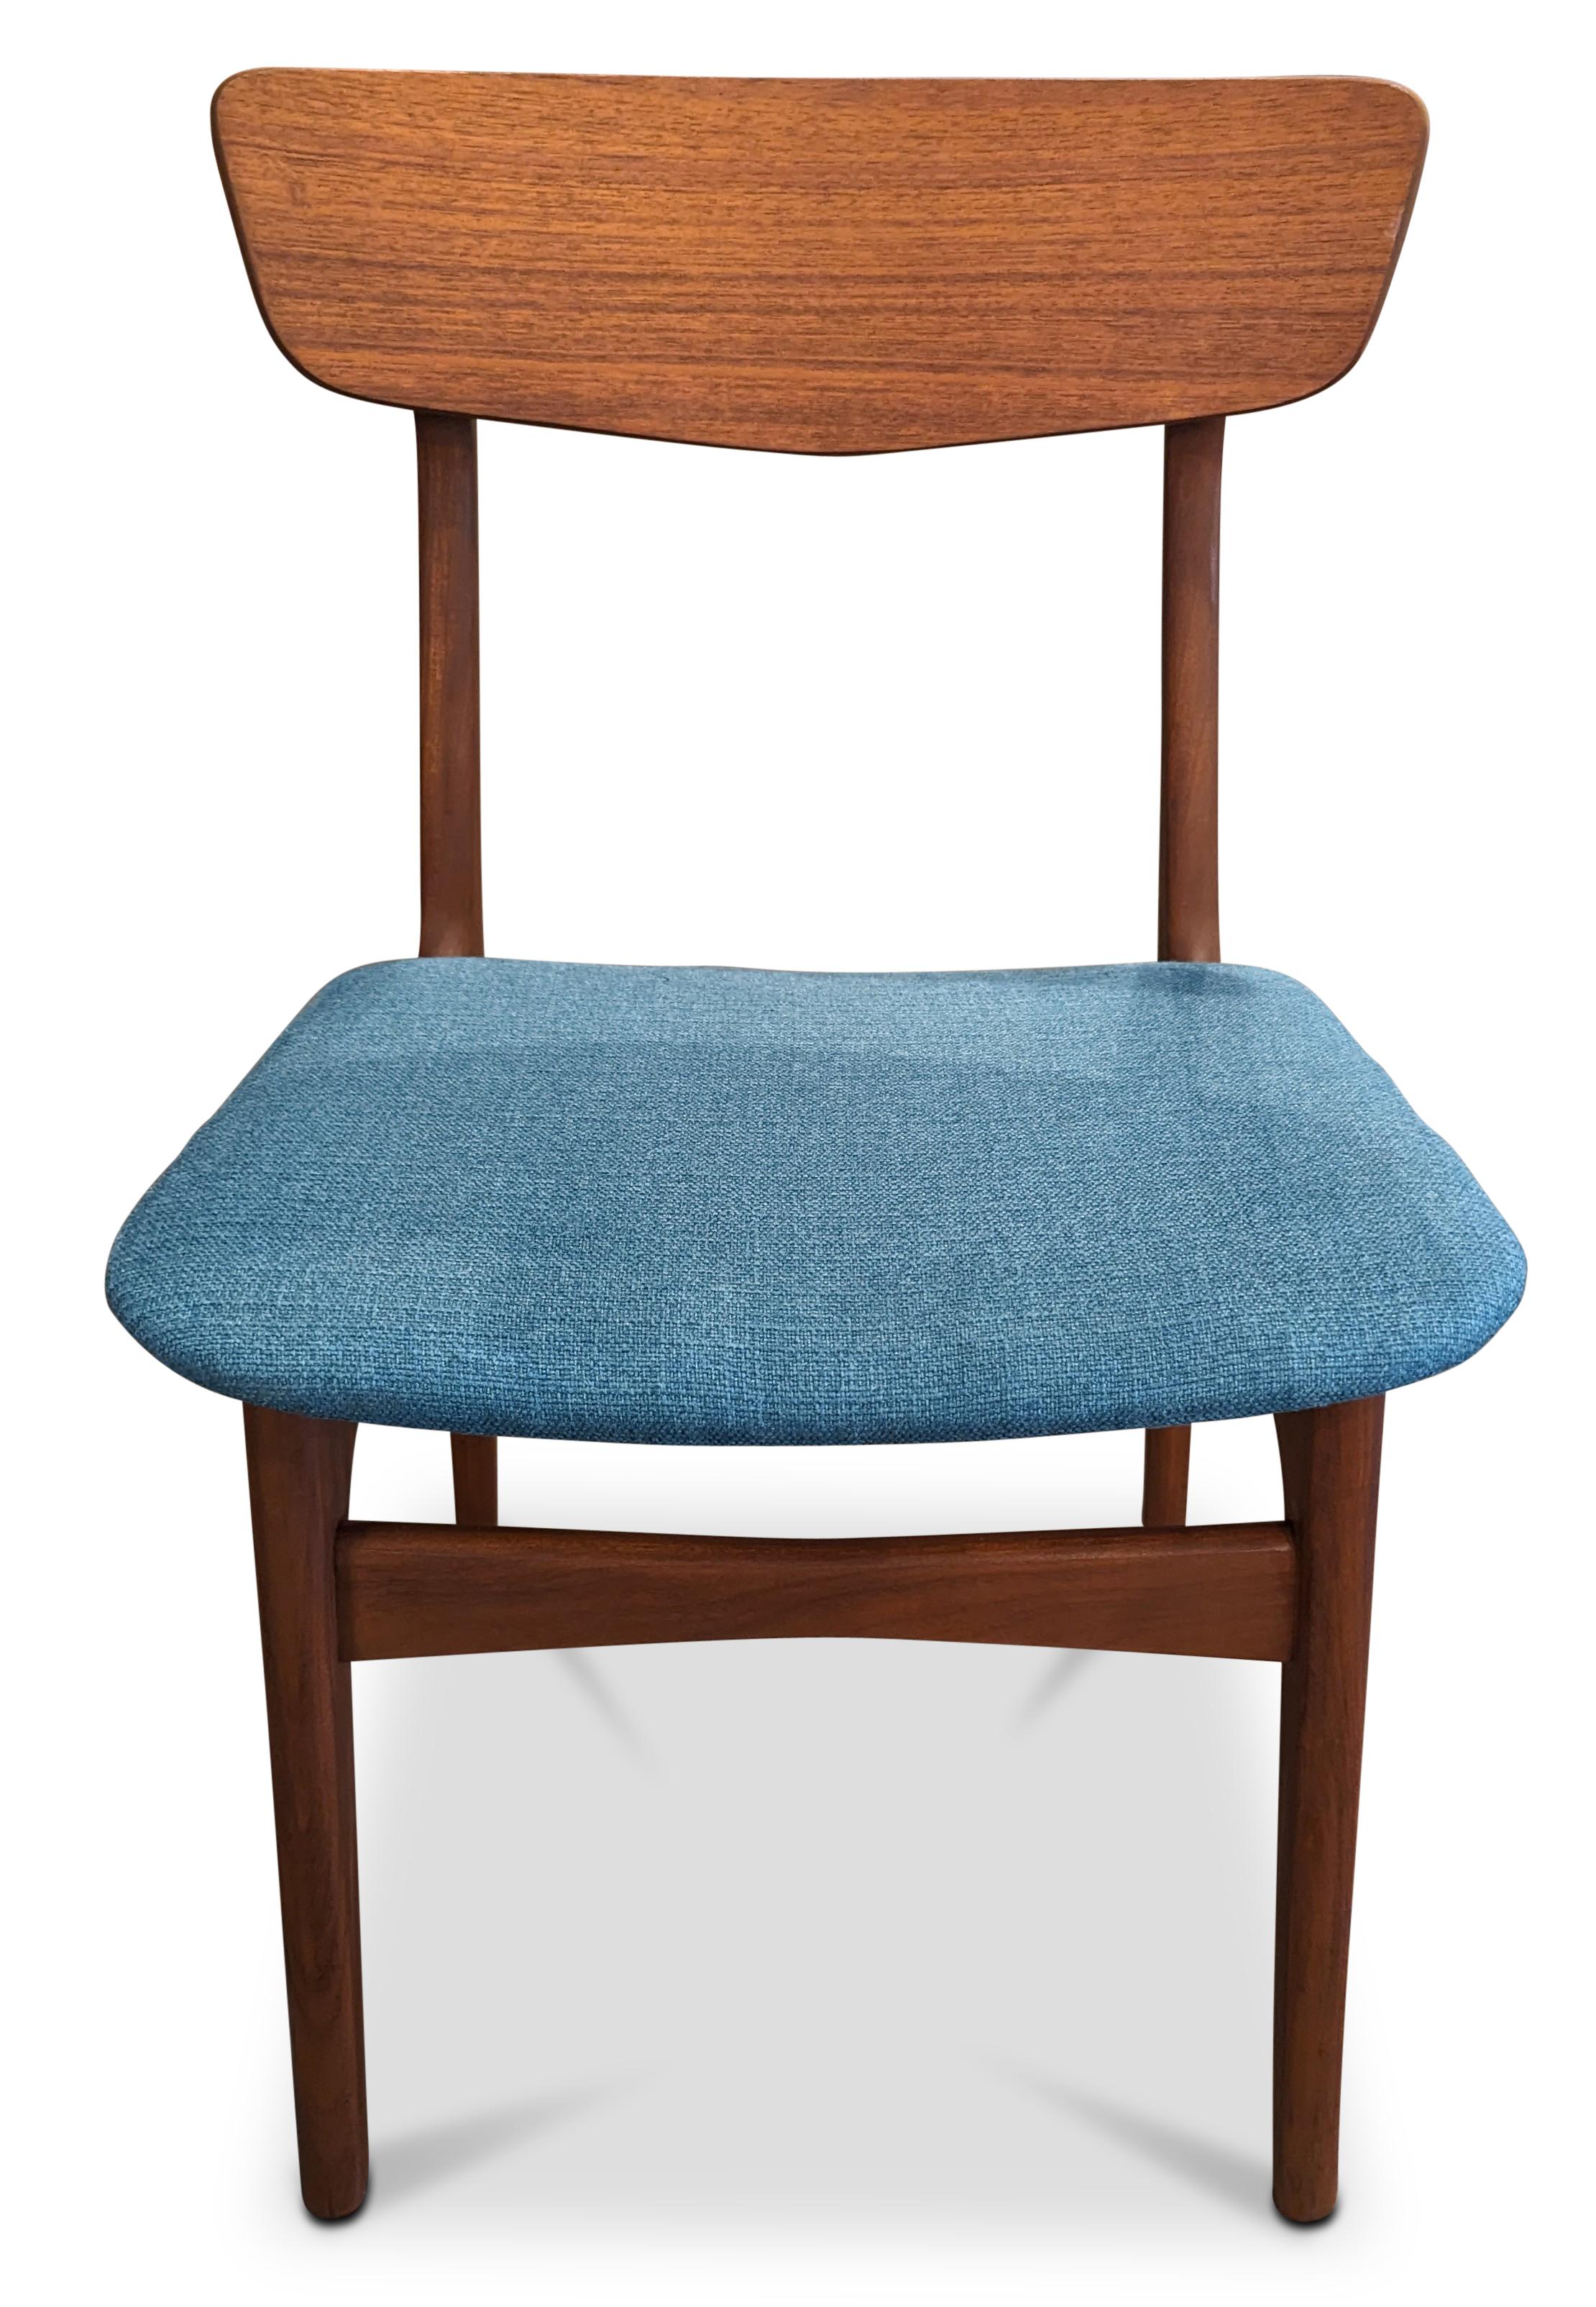 New Upholstery - Teal Fabric
Vintage Danish mid-century modern, made in the 1950's - Recently refurbished

The piece is more than 65+ years old and some wear and tear can be expected, but we do everything we can to refurbish them in respect to the